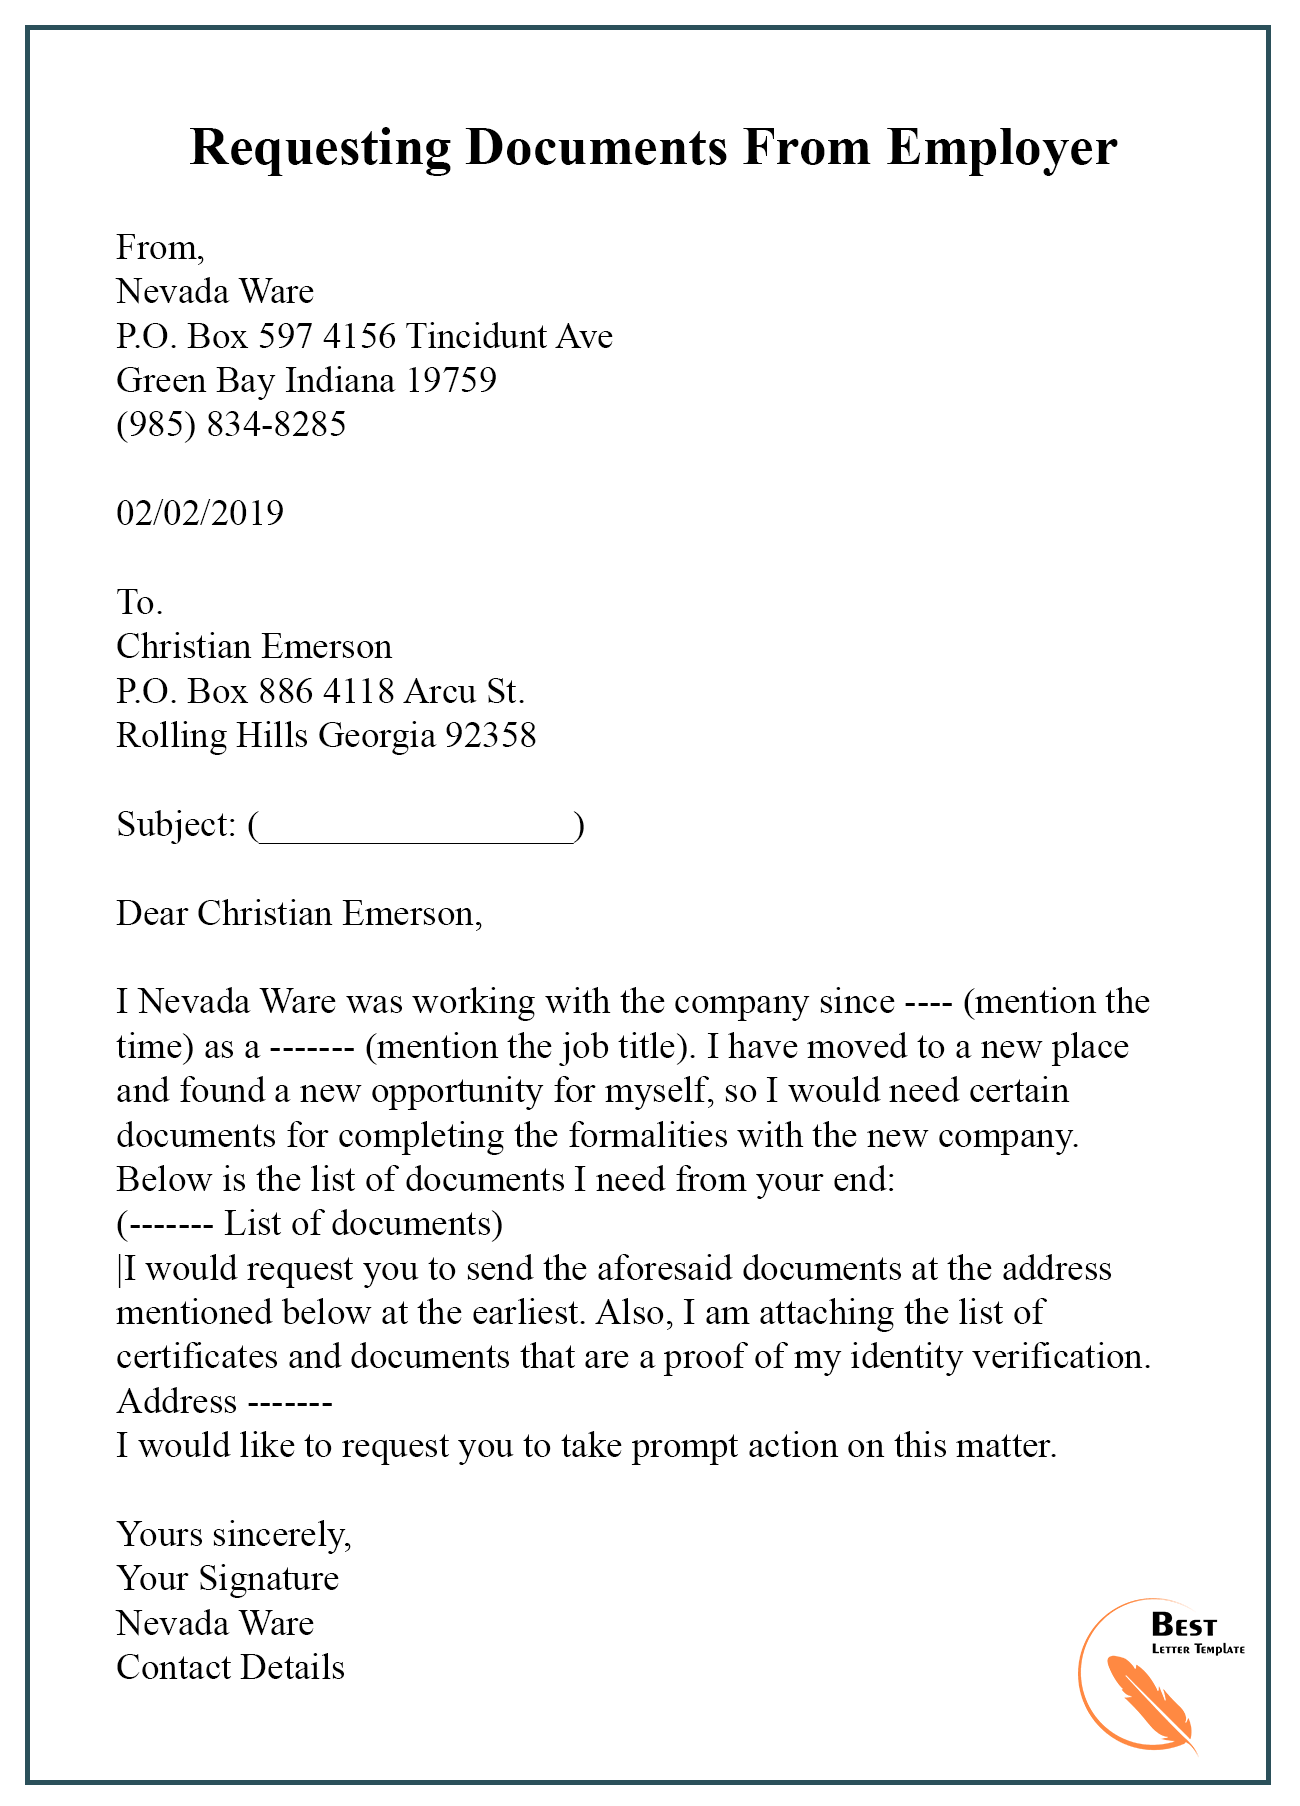 SAMPLE LETTER REQUESTING DOCUMENTS FROM EMPLOYER